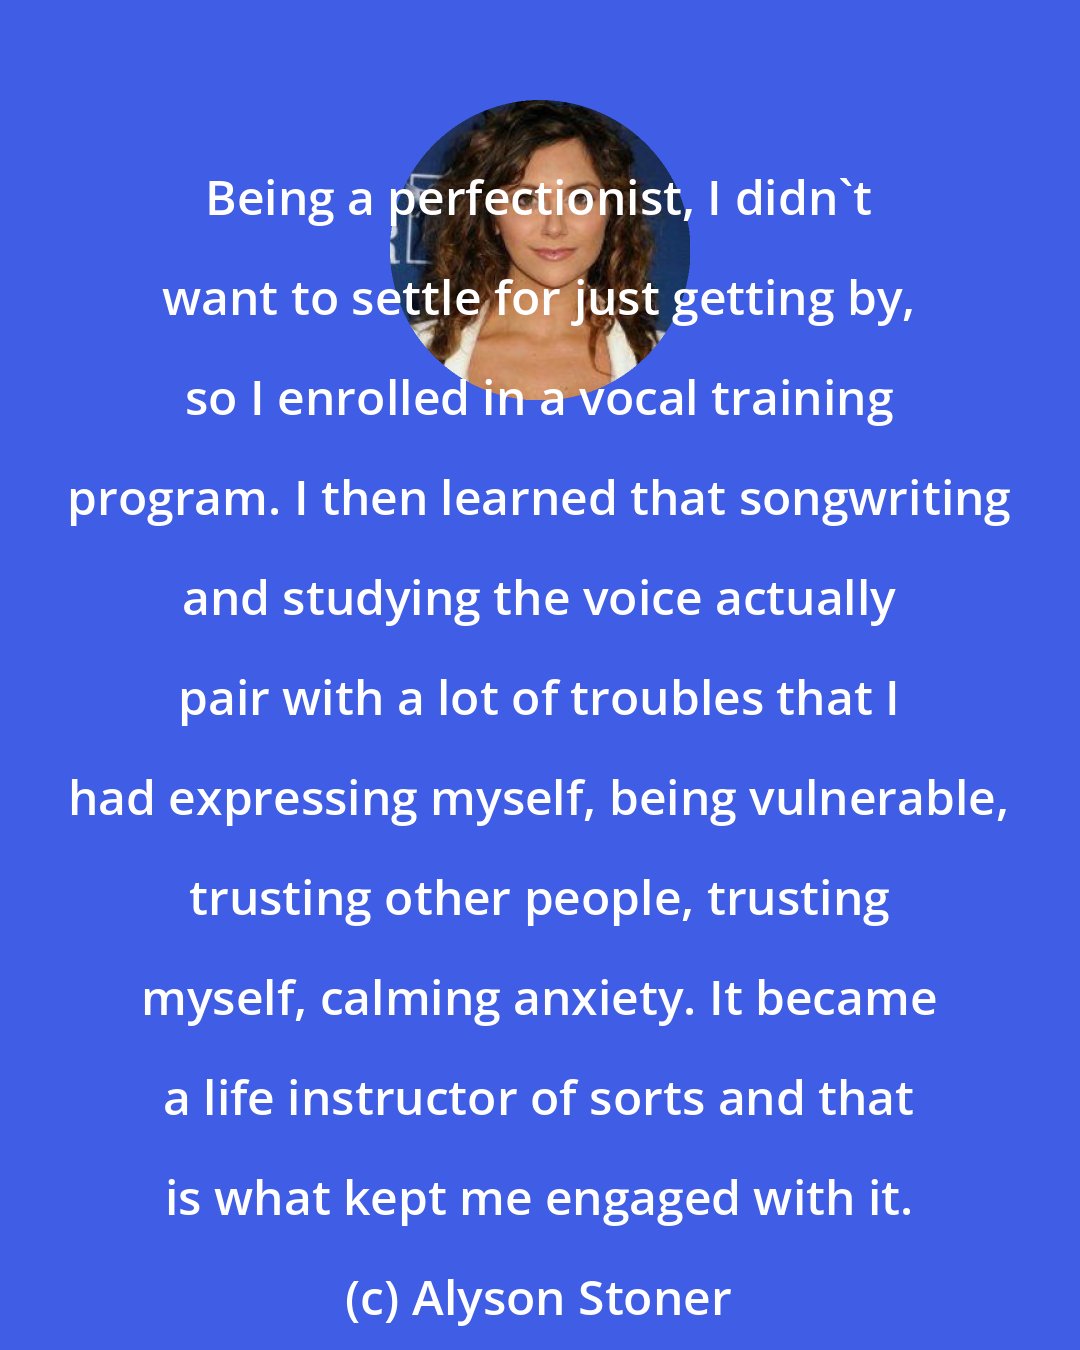 Alyson Stoner: Being a perfectionist, I didn't want to settle for just getting by, so I enrolled in a vocal training program. I then learned that songwriting and studying the voice actually pair with a lot of troubles that I had expressing myself, being vulnerable, trusting other people, trusting myself, calming anxiety. It became a life instructor of sorts and that is what kept me engaged with it.